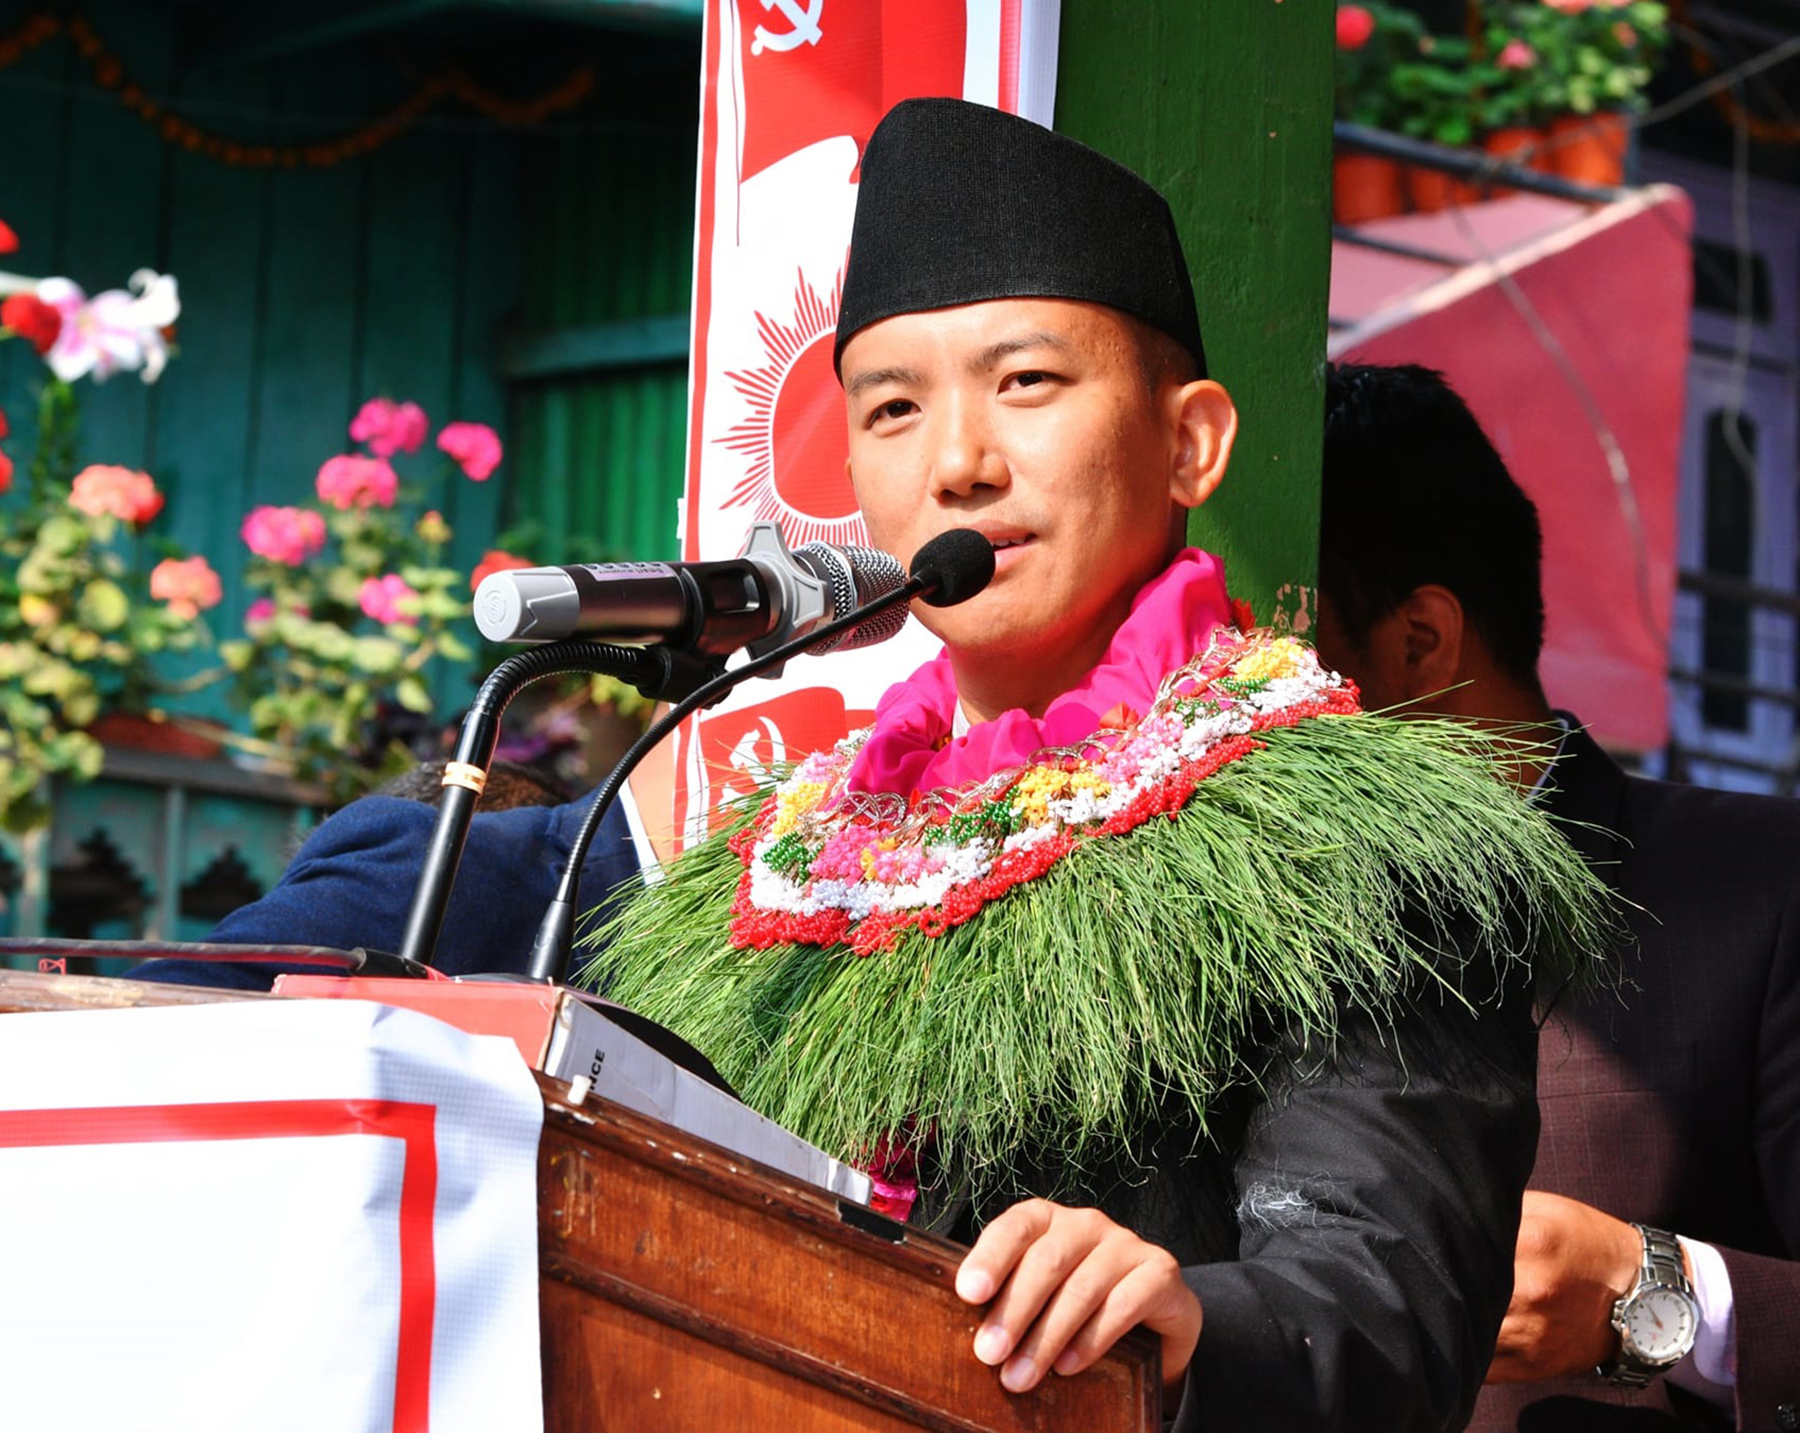 Suhang Nembang taking the oath of parliament